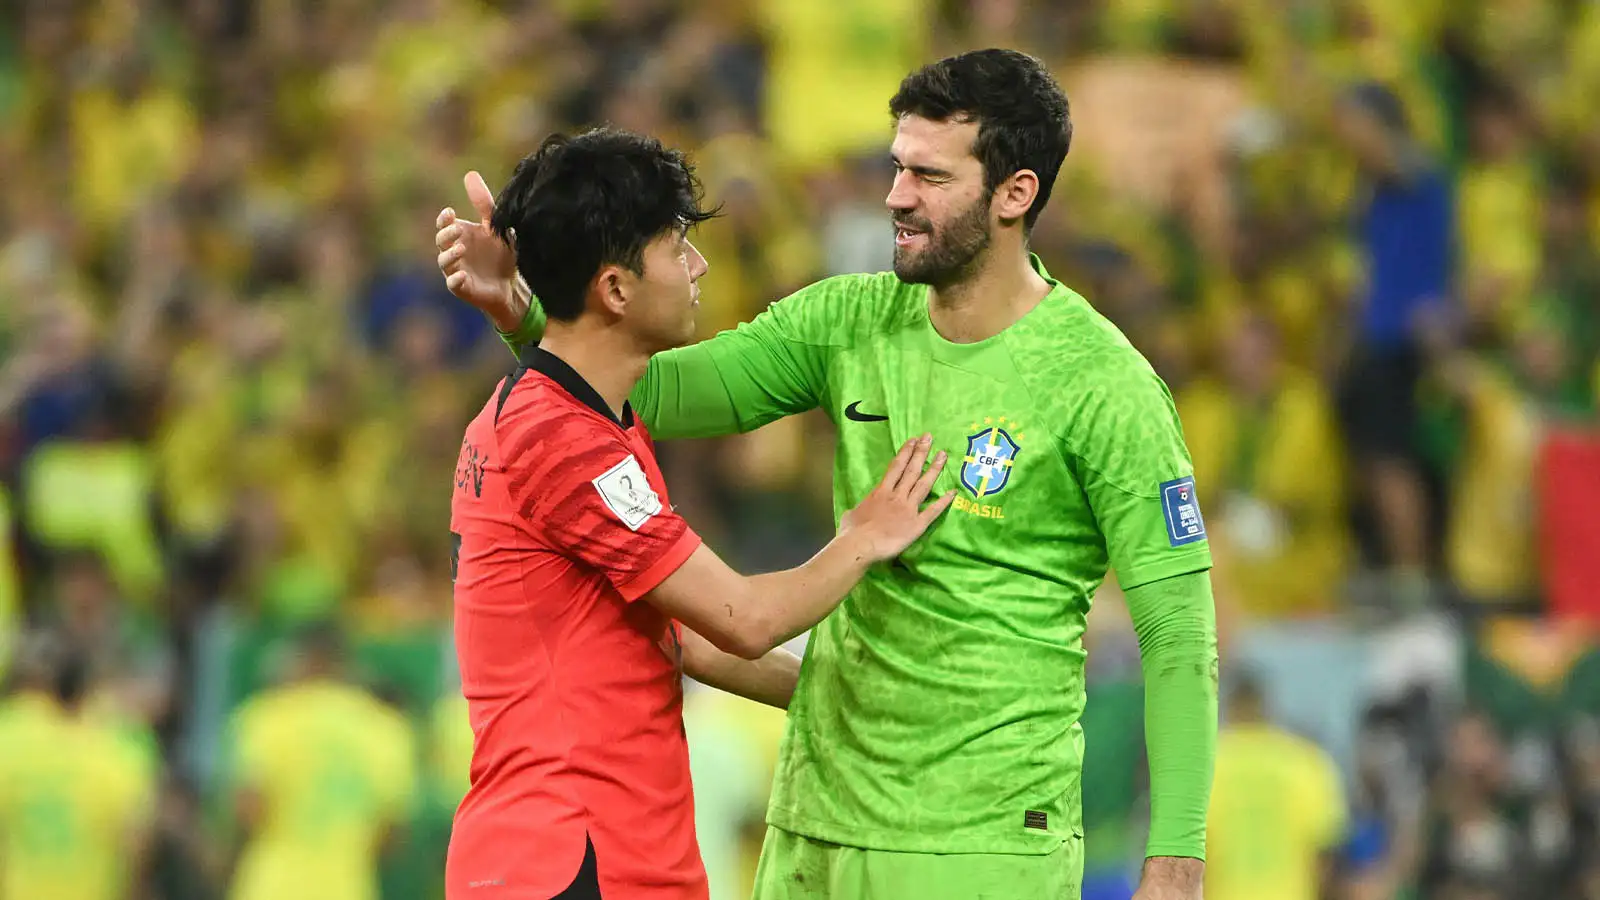 Watch: Brazil’s Alisson shows class in wholesome moment with Son